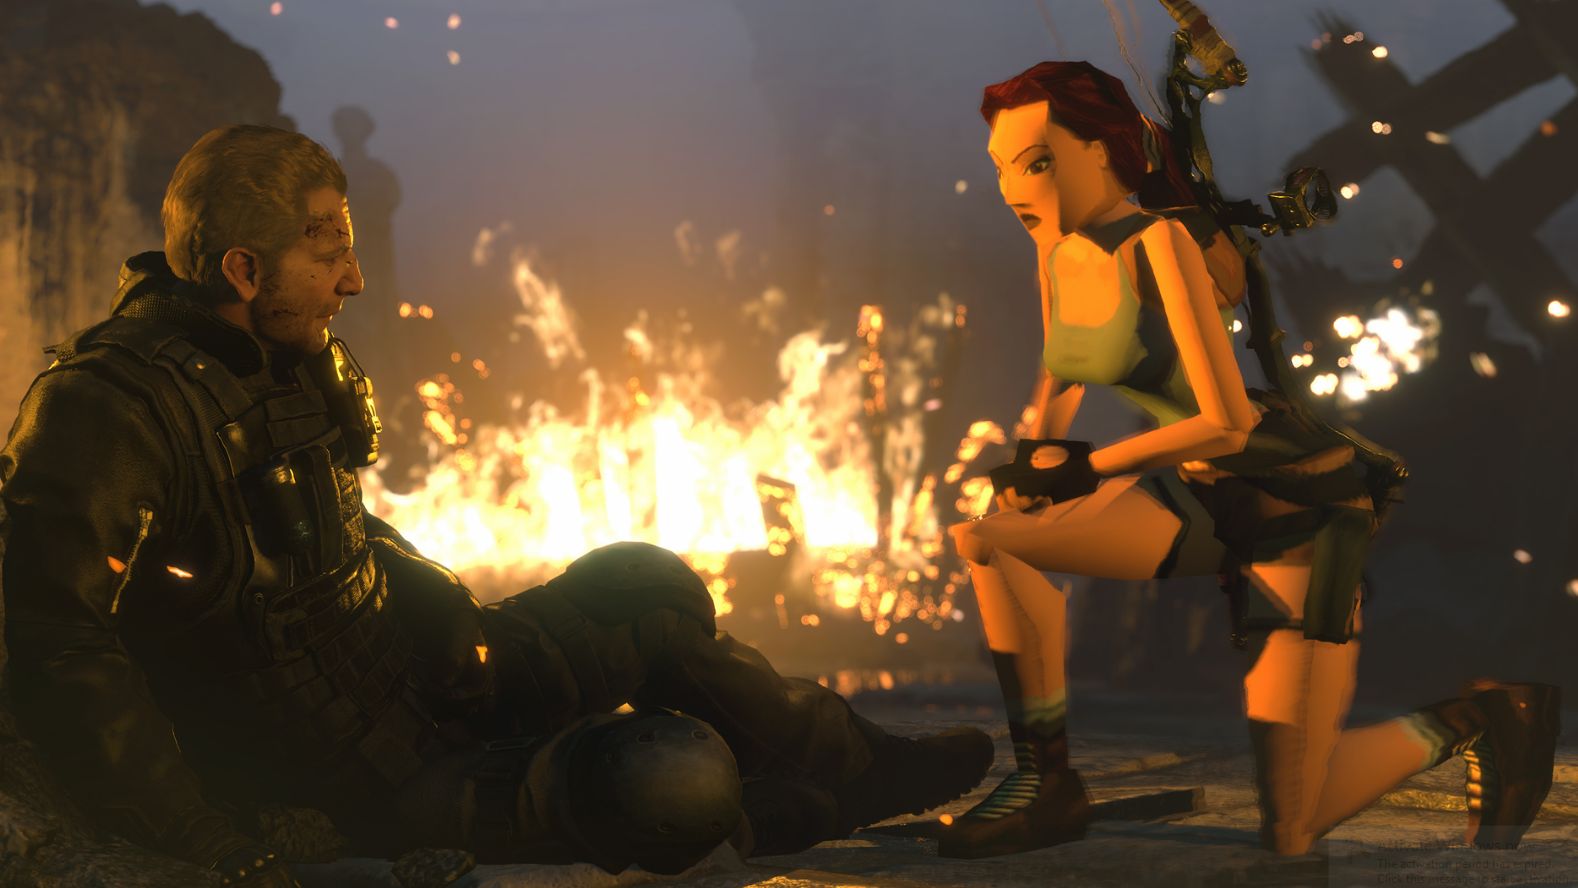 Netflix is making anime adaptations of Tomb Raider and Skull